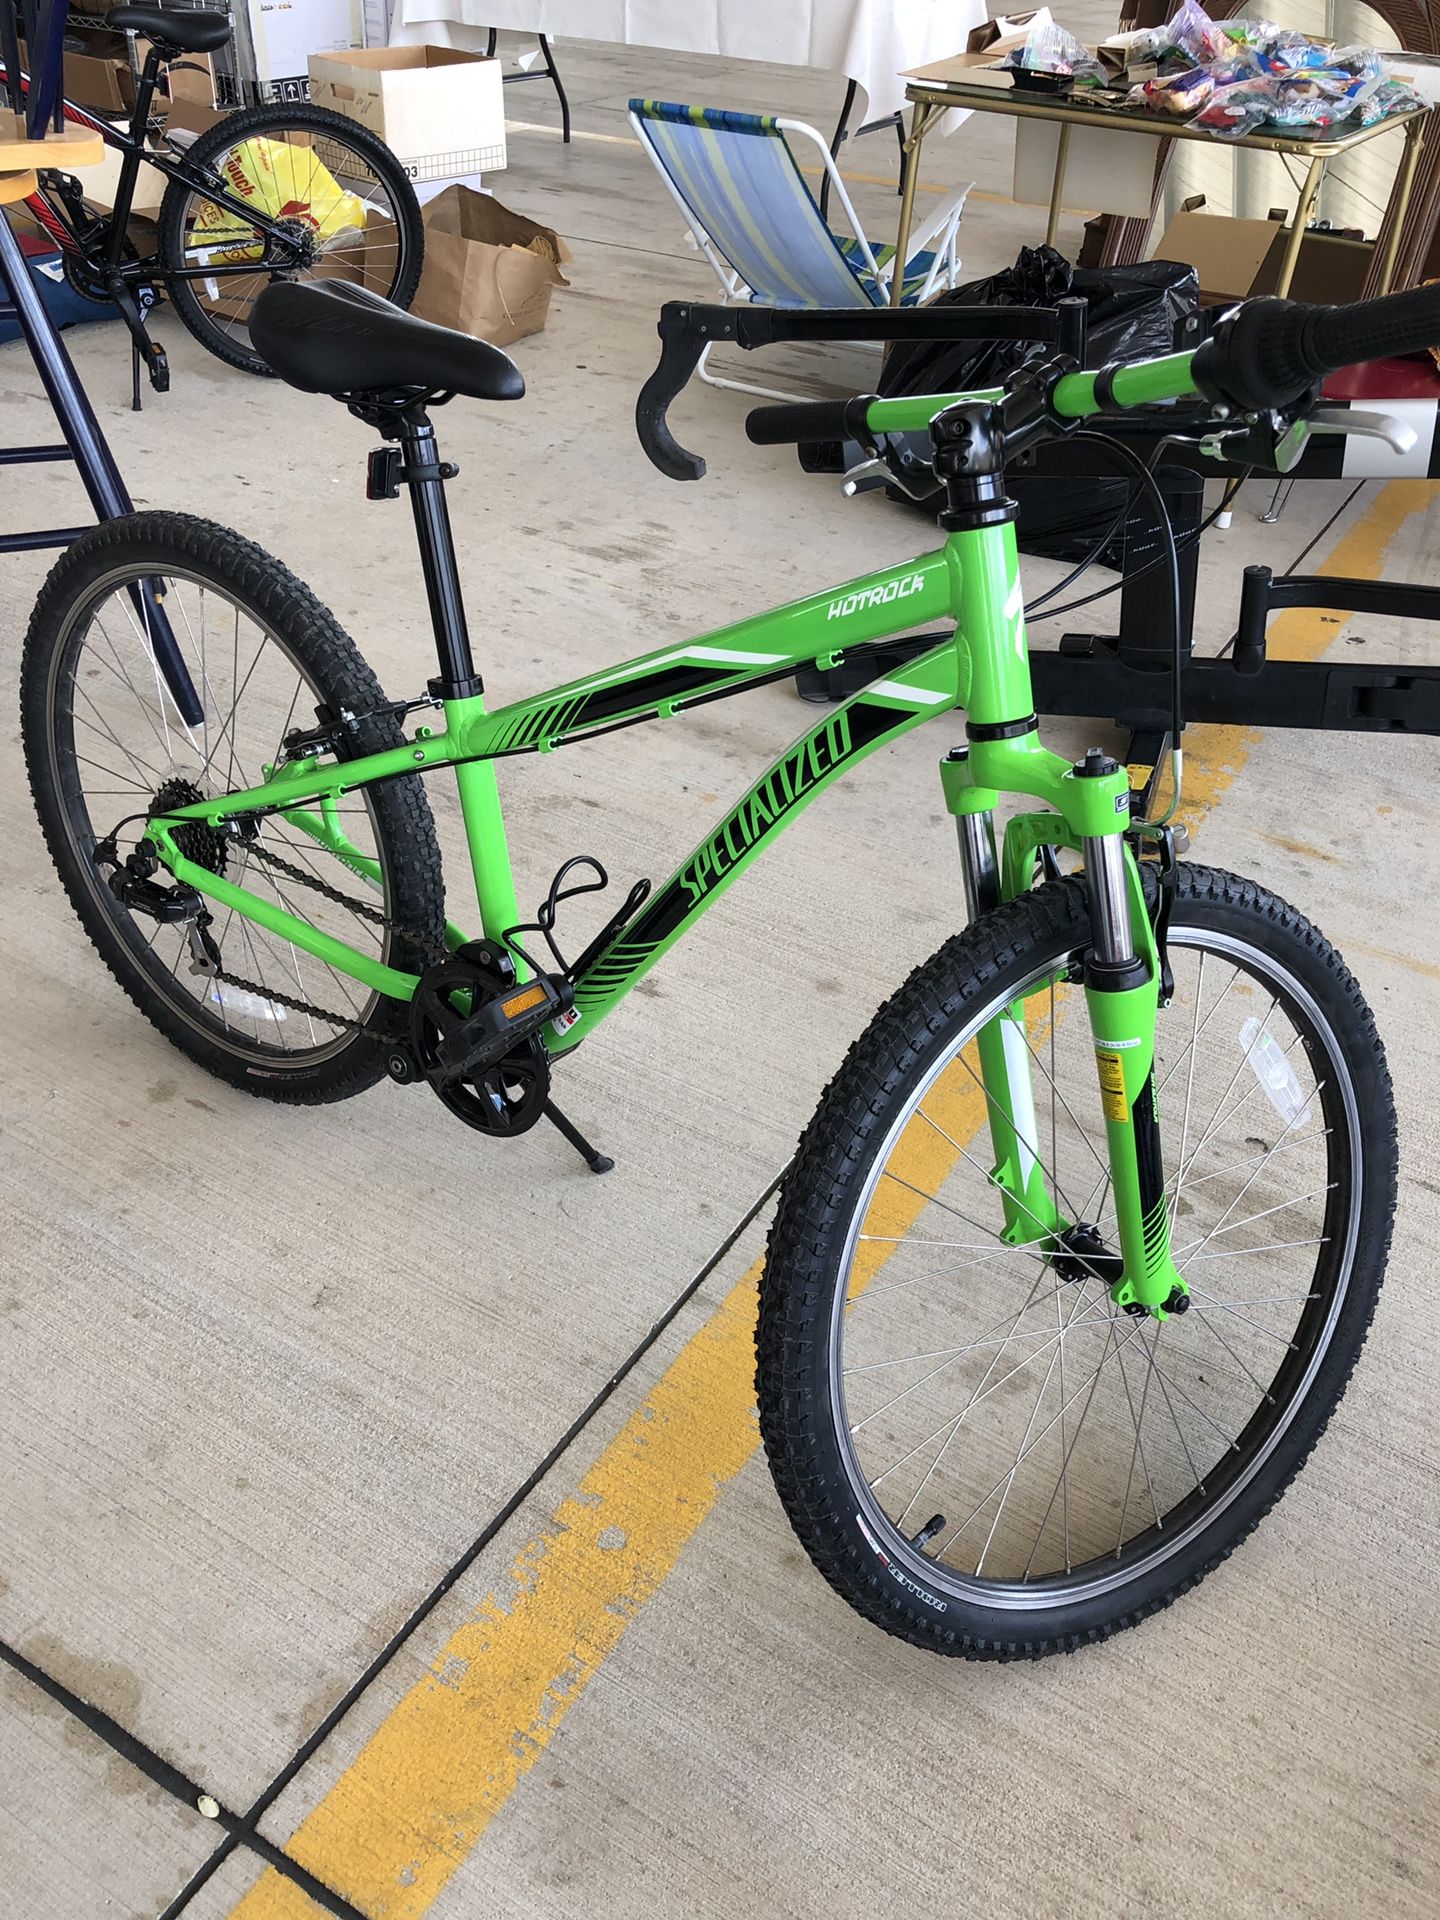 Used Specialized HotRock 24” Green 7 Speed Street Bike with Revo Shift and Roller 24x2 FlackJacket Puncture Protection Tires